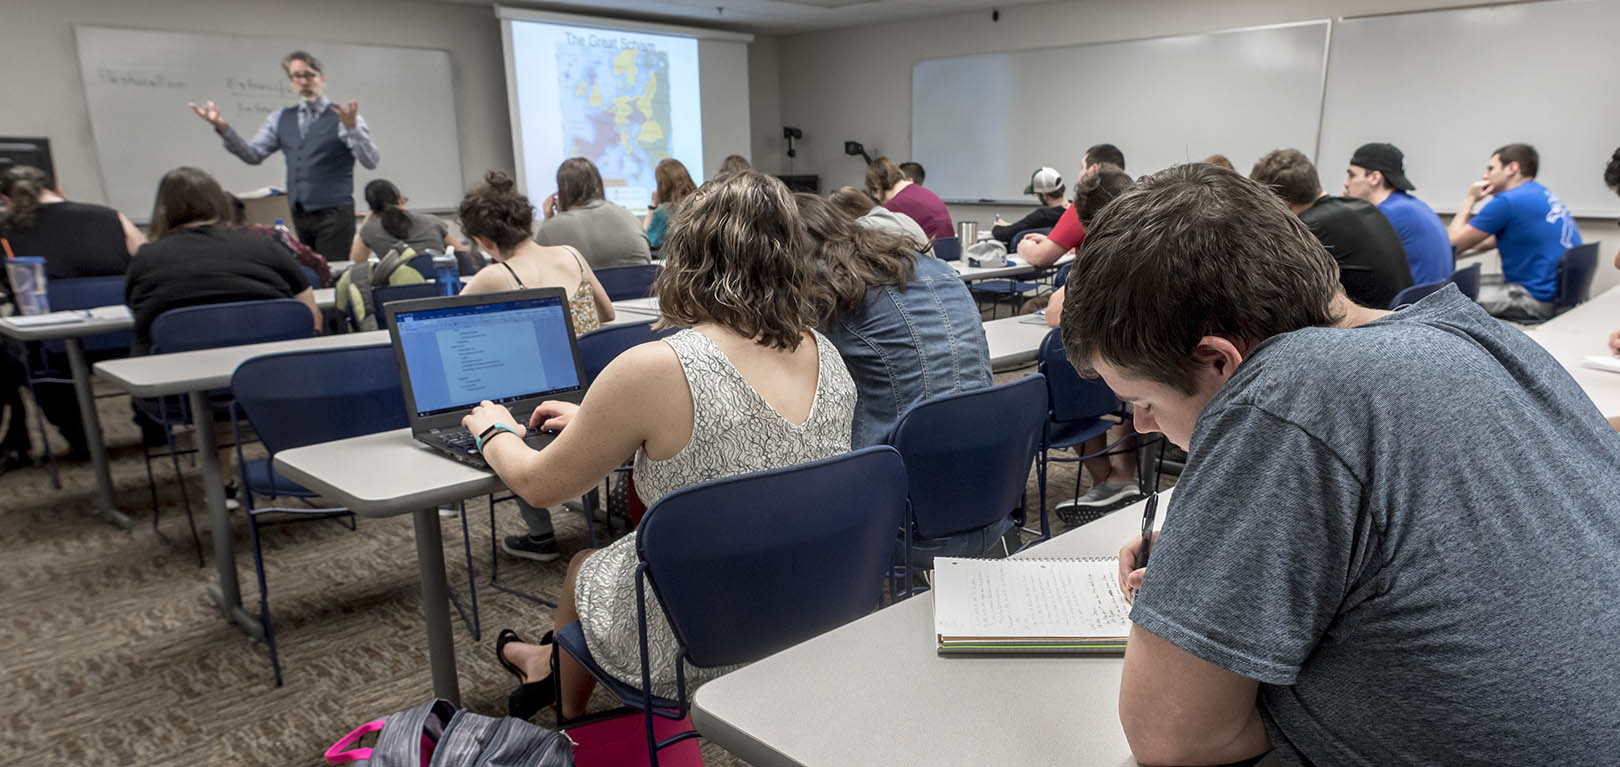 A student takes notes while a professor teaches at the front of the room.